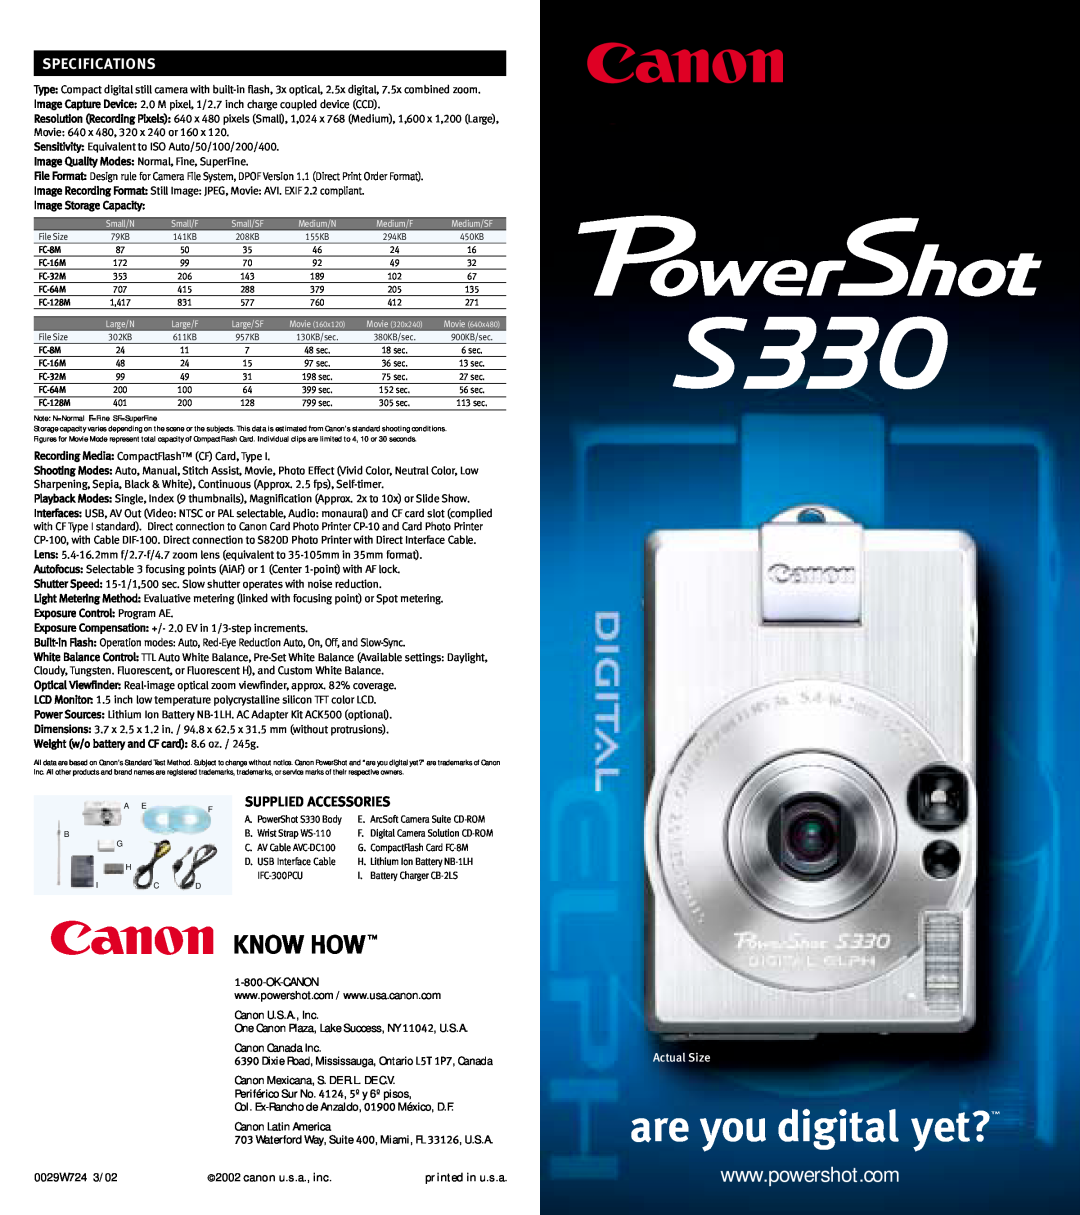 Canon 330 specifications Specifications, Supplied Accessories, Actual Size 